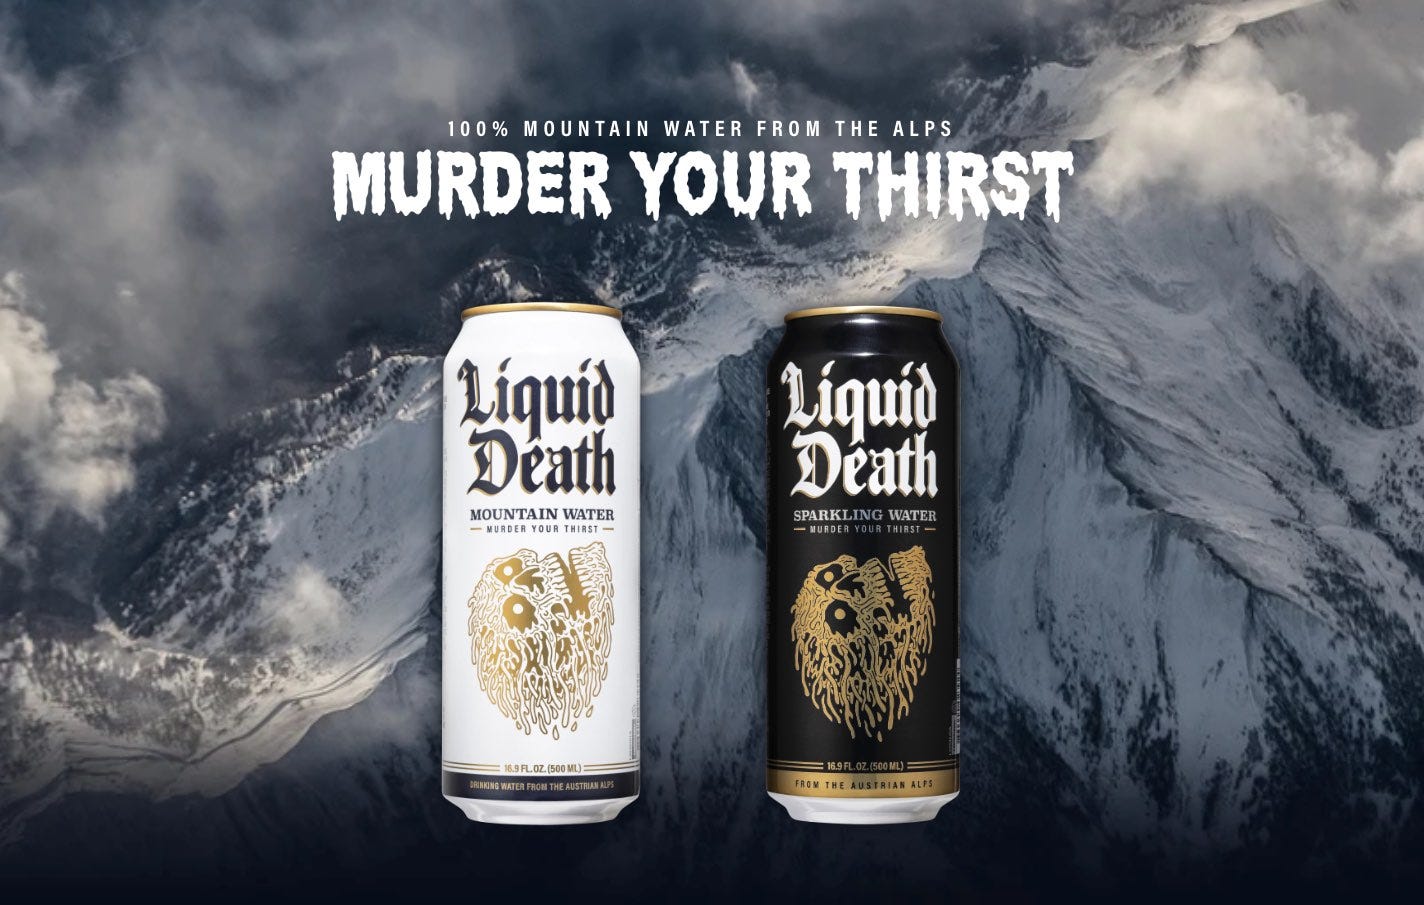 Liquid Death Has The Best Marketing in Water, by Gregory Yellin